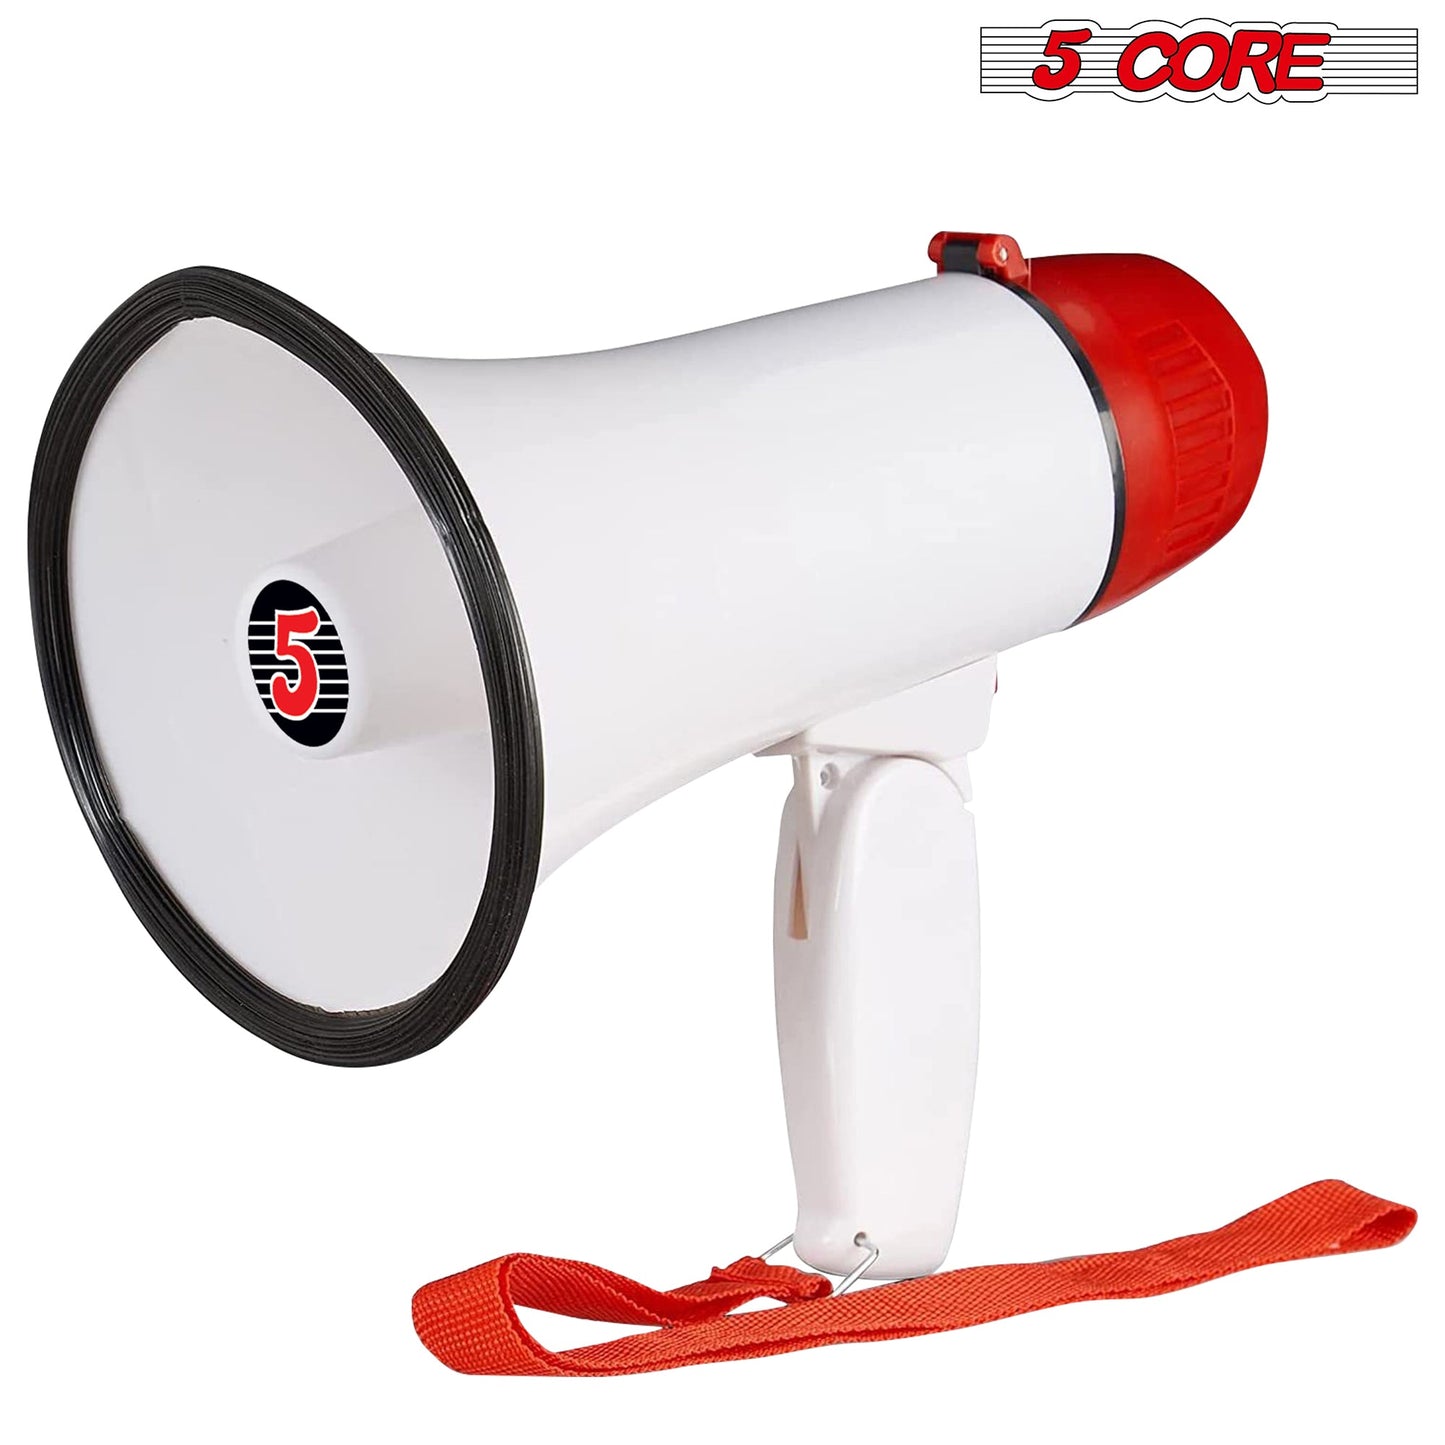 Kcubeinc Megaphone Speakers Amplifier White-Red | 10W Cheer Megaphone with Recording, Volume Control, and Siren Alarm| Battery Operated and Foldable Handle | Bullhorn Speaker with Strap- 6R